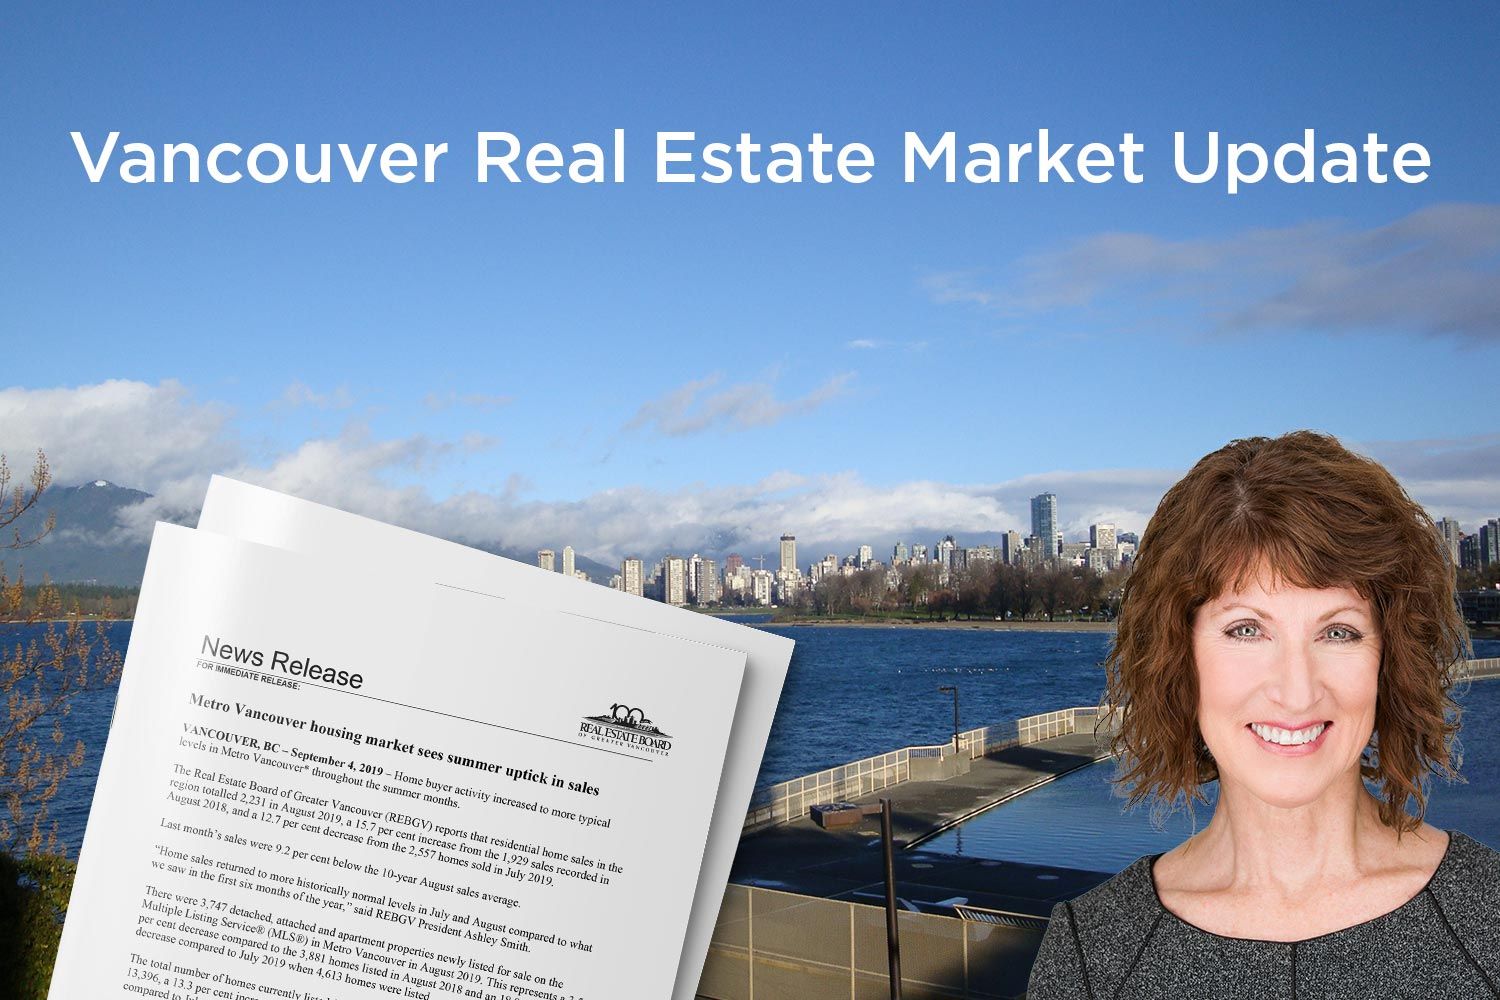 Metro Vancouver housing market sees summer uptick in sales